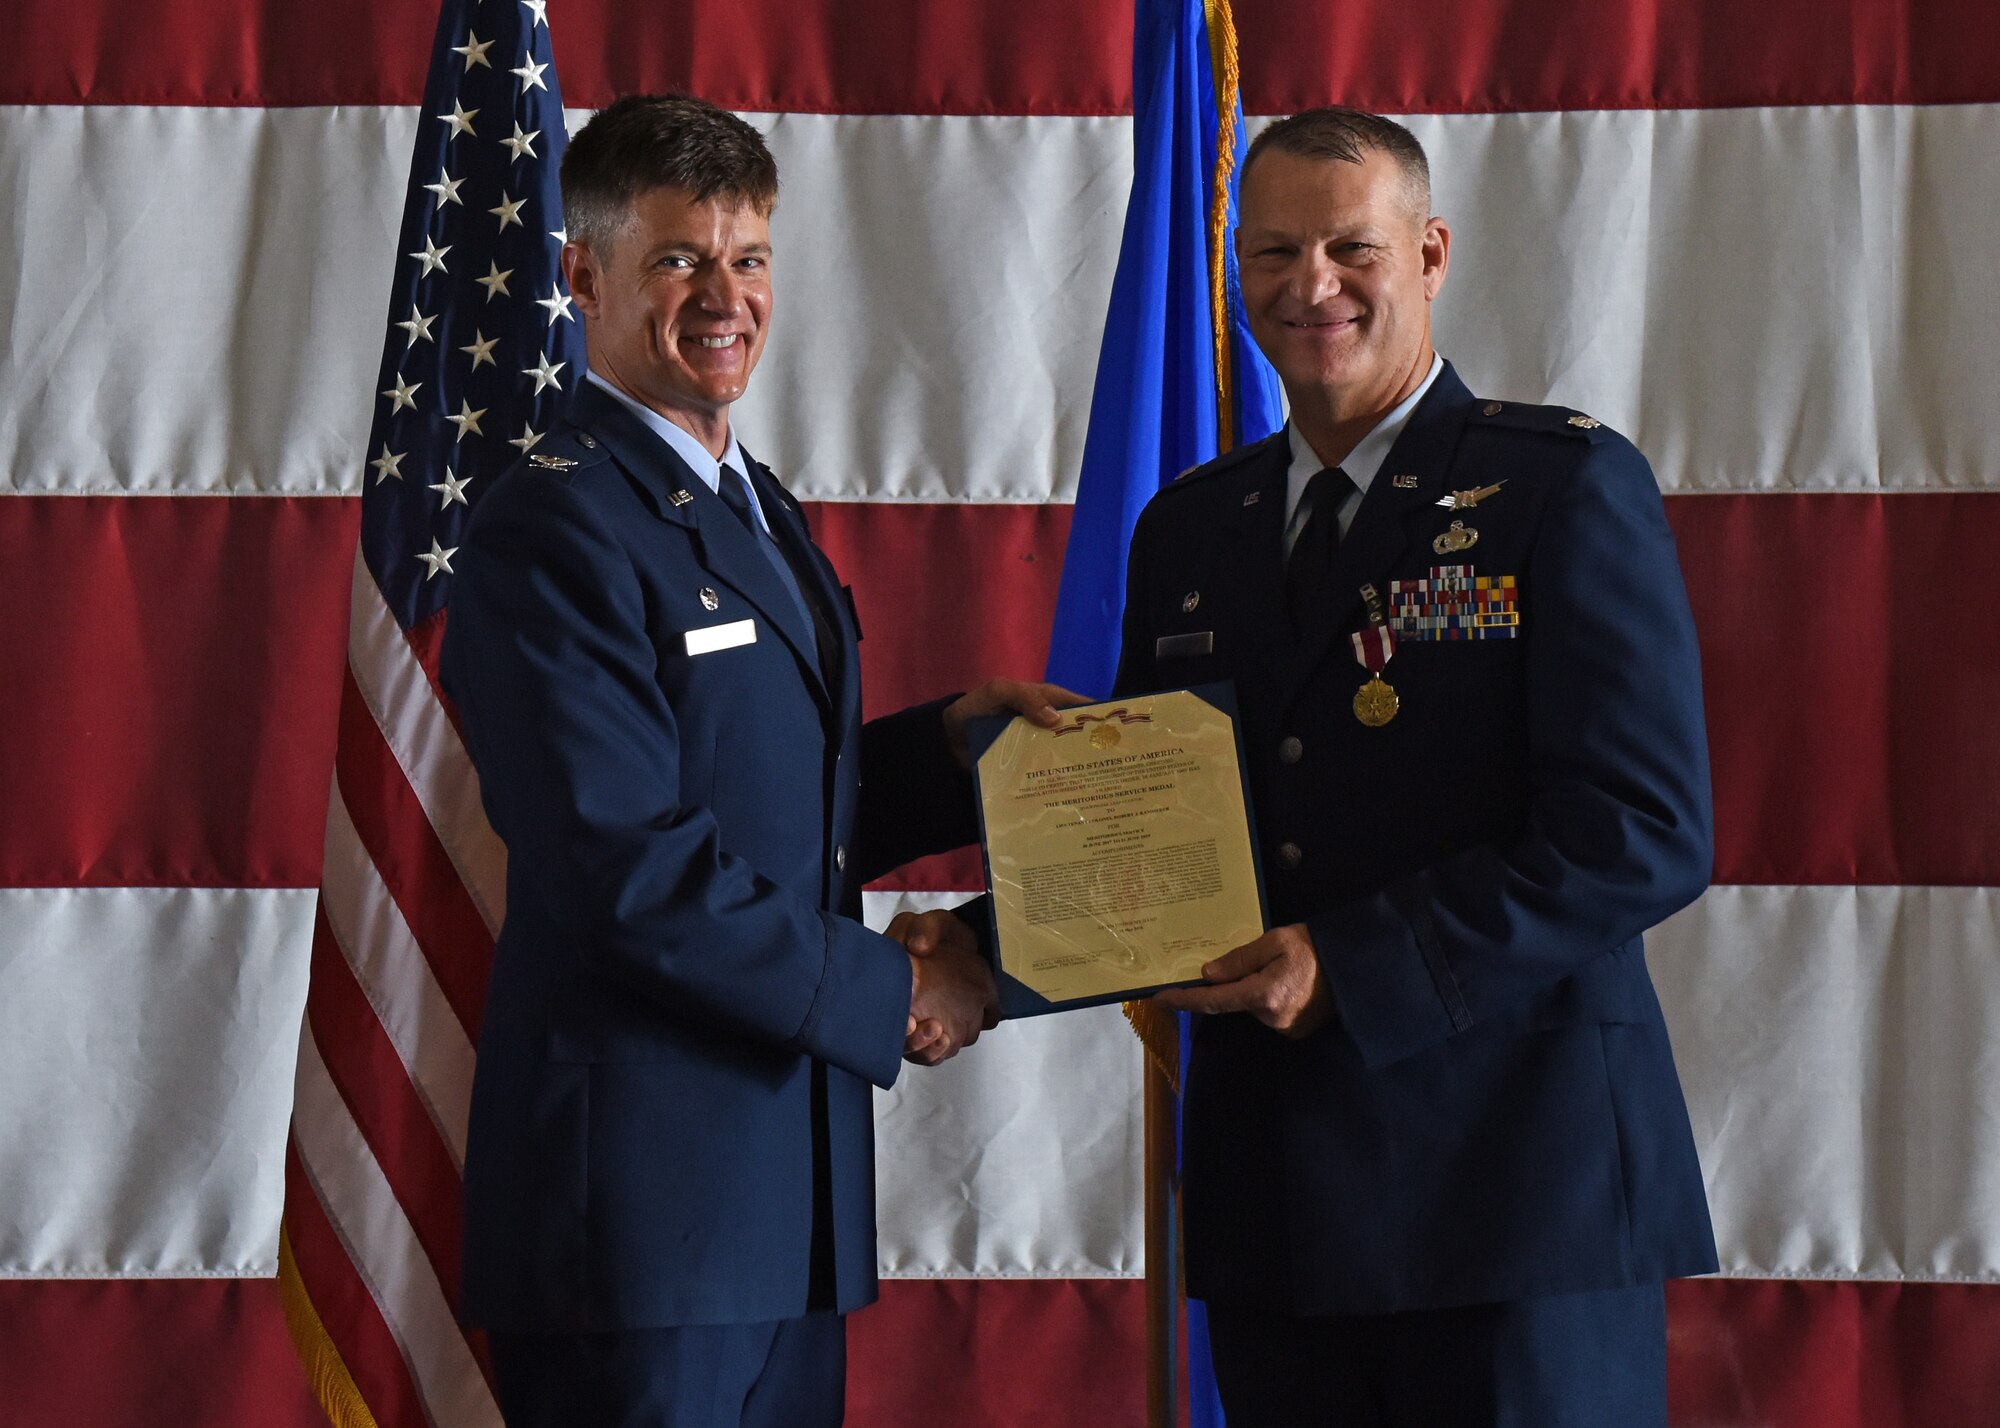 U.S. Air Force Col. Thomas Coakley, 17th Training Group commander, presents Lt. Col. Robert Kammerer, 316th Training Squadron outgoing commander, the certificate for Kammerer’s Meritorious Service Medal during the change of command ceremony at the Louis F. Garland Department of Defense Fire Academy High Bay on Goodfellow Air Force Base, Texas, June 21, 2019. Kammerer was responsible for training over 6,400 Army, Navy, Air Force, Marine, and Coast Guard intelligence warriors annually, in communication signals intelligence, electronic intelligence, fusion analysis, cryptologic language analysis, and human intelligence. (U.S. Air Force photo by Airman 1st Class Zachary Chapman/Released)